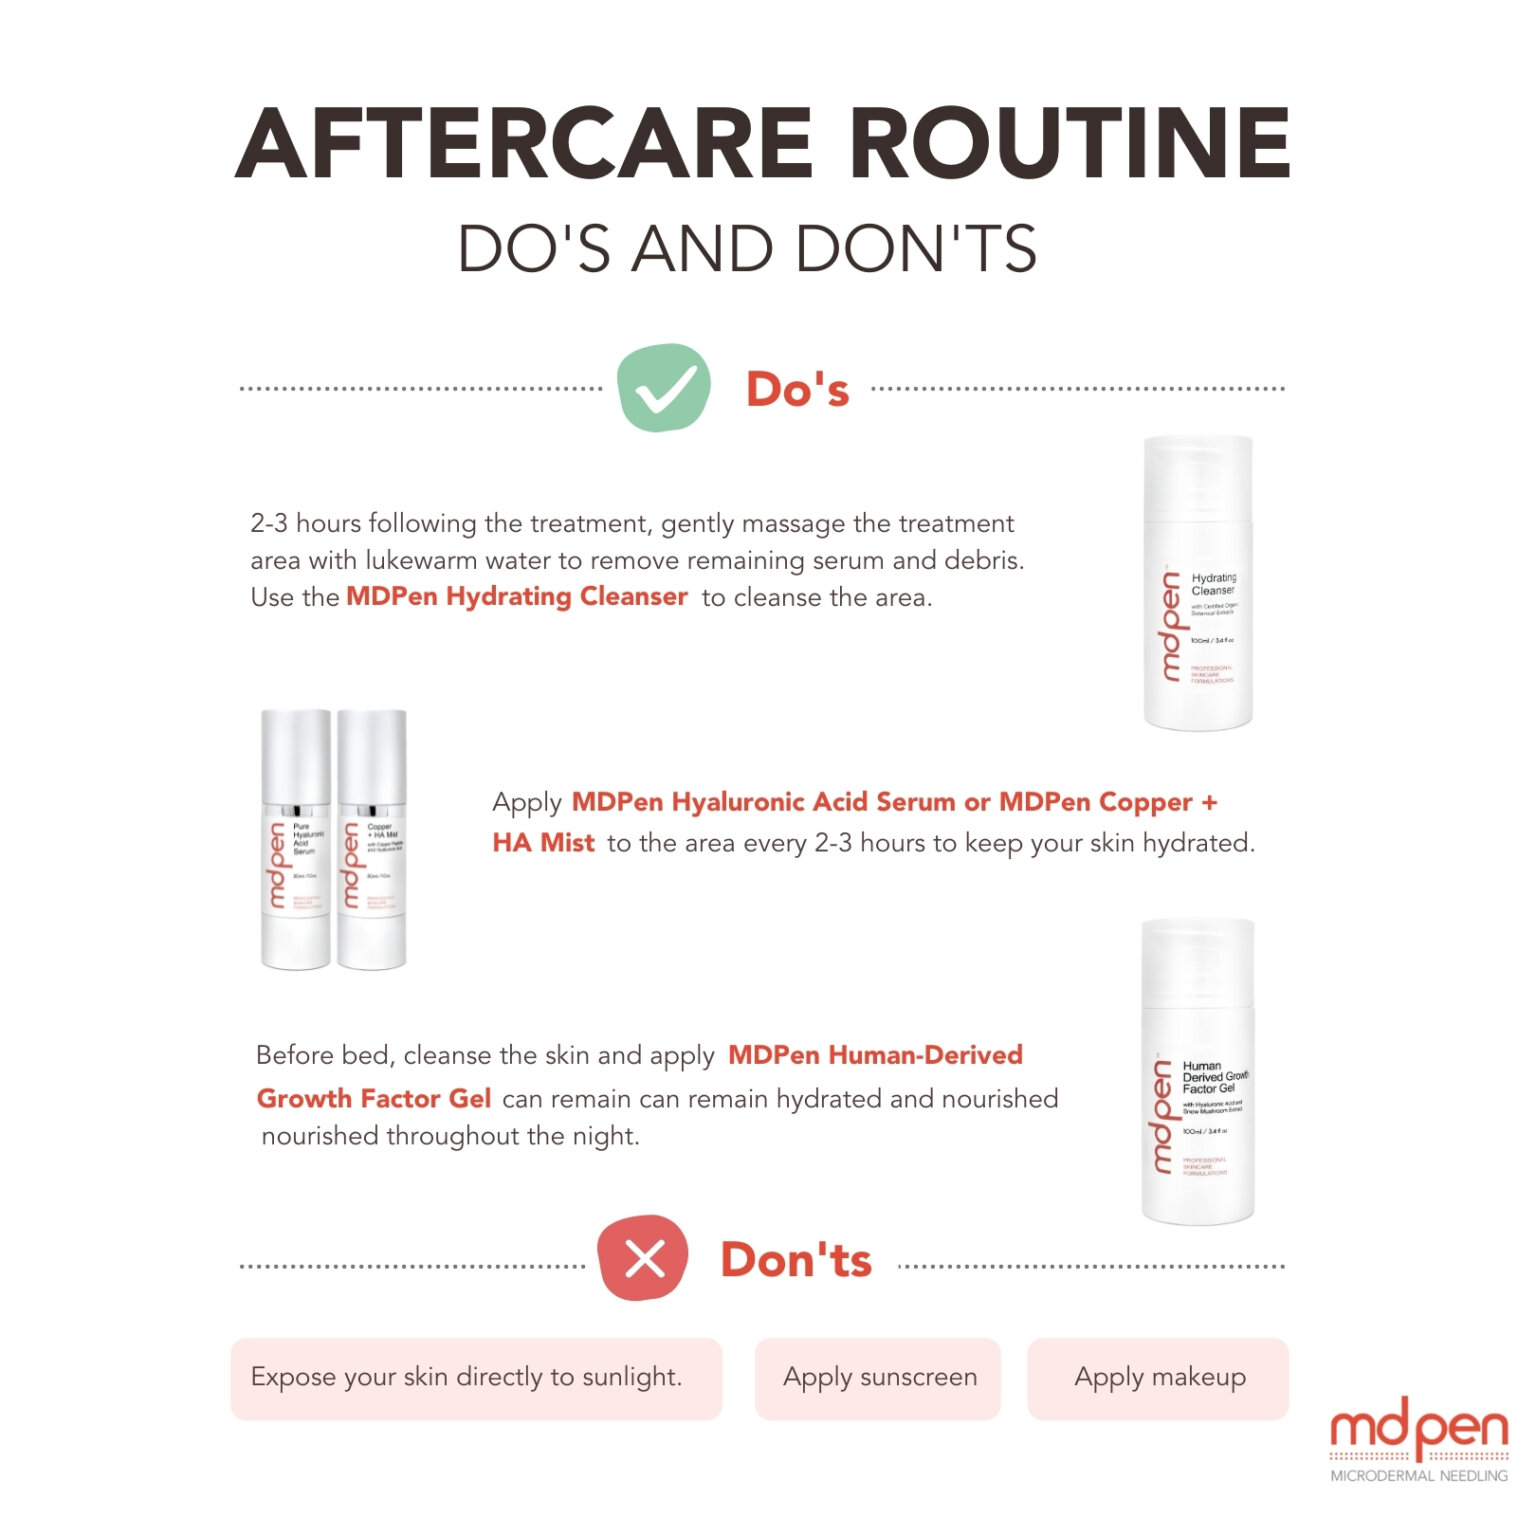 Post-Micro Needling: The Do’s and Don’ts of Skin Care